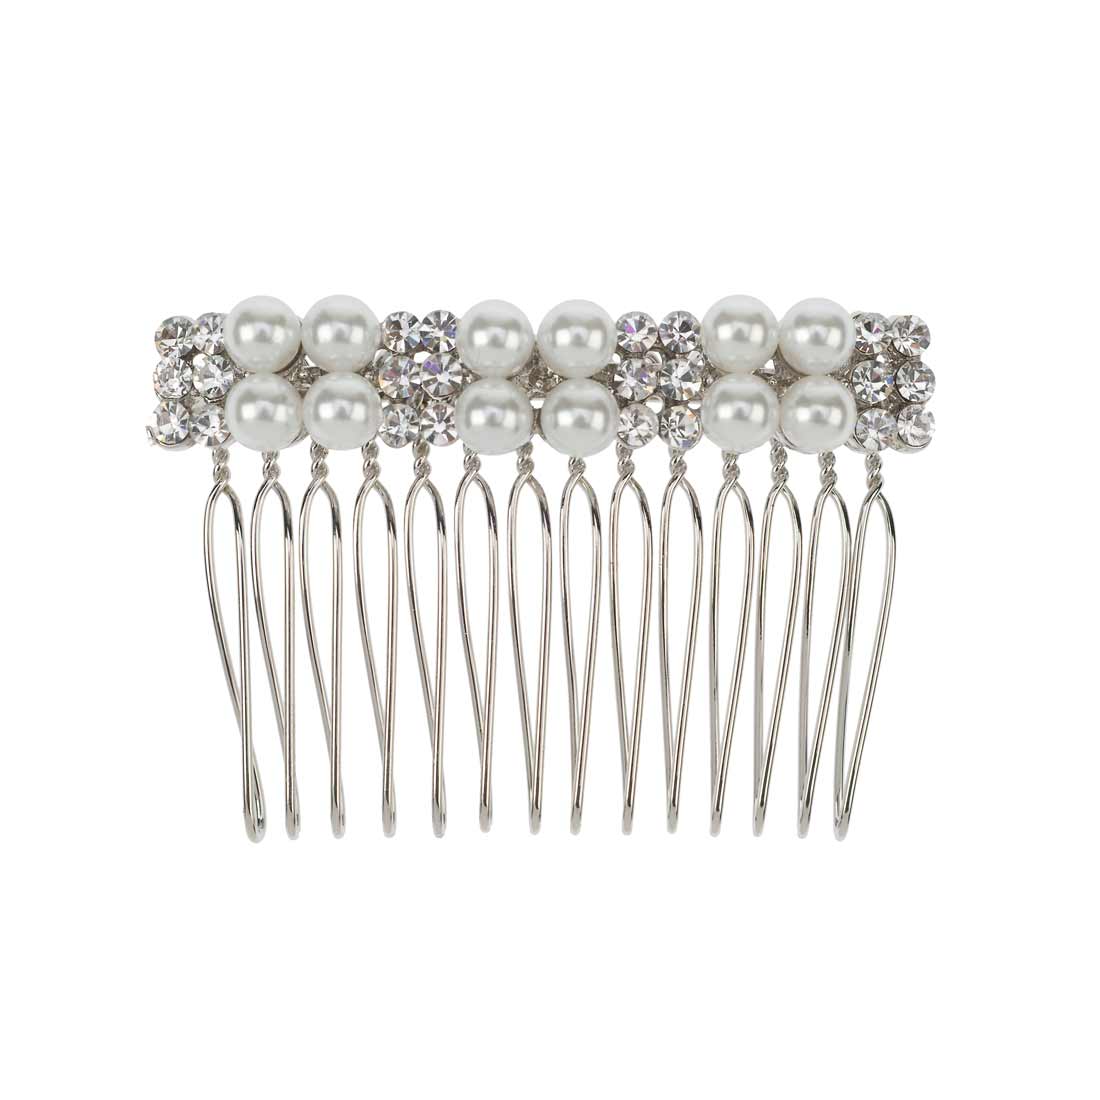 Divinely Pearl Small Wedding Hair Comb